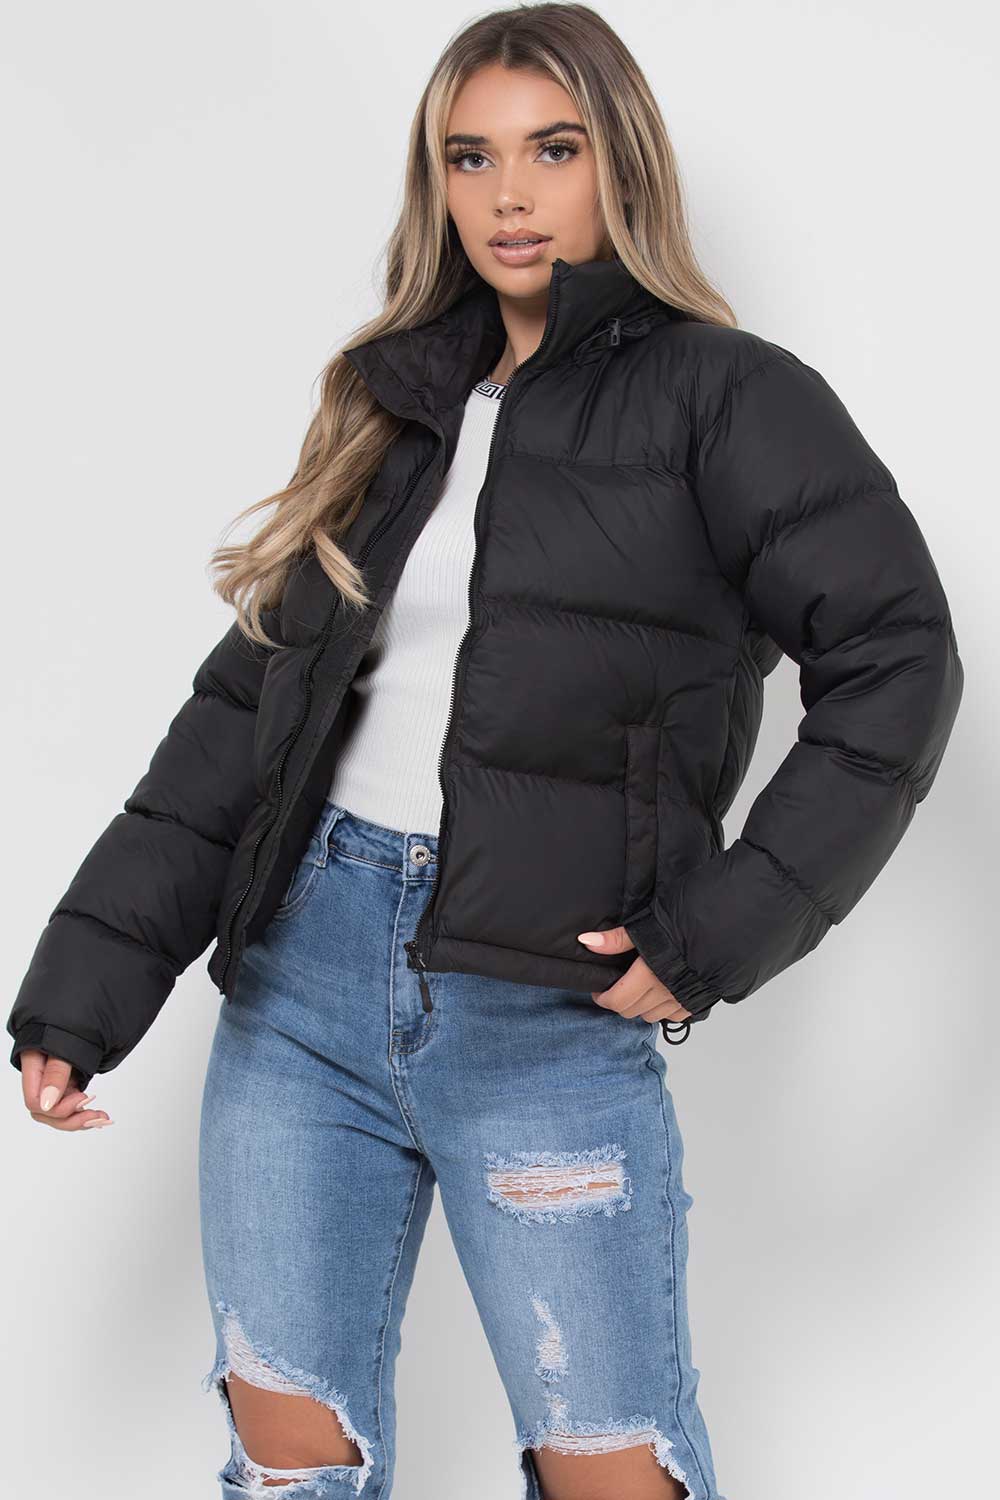 Women's Winter Cropped Outwear Long Sleeve Quilted Puffer Jacket Zip Up  Stand Collar Padded Coat at Amazon Women's Coats Shop